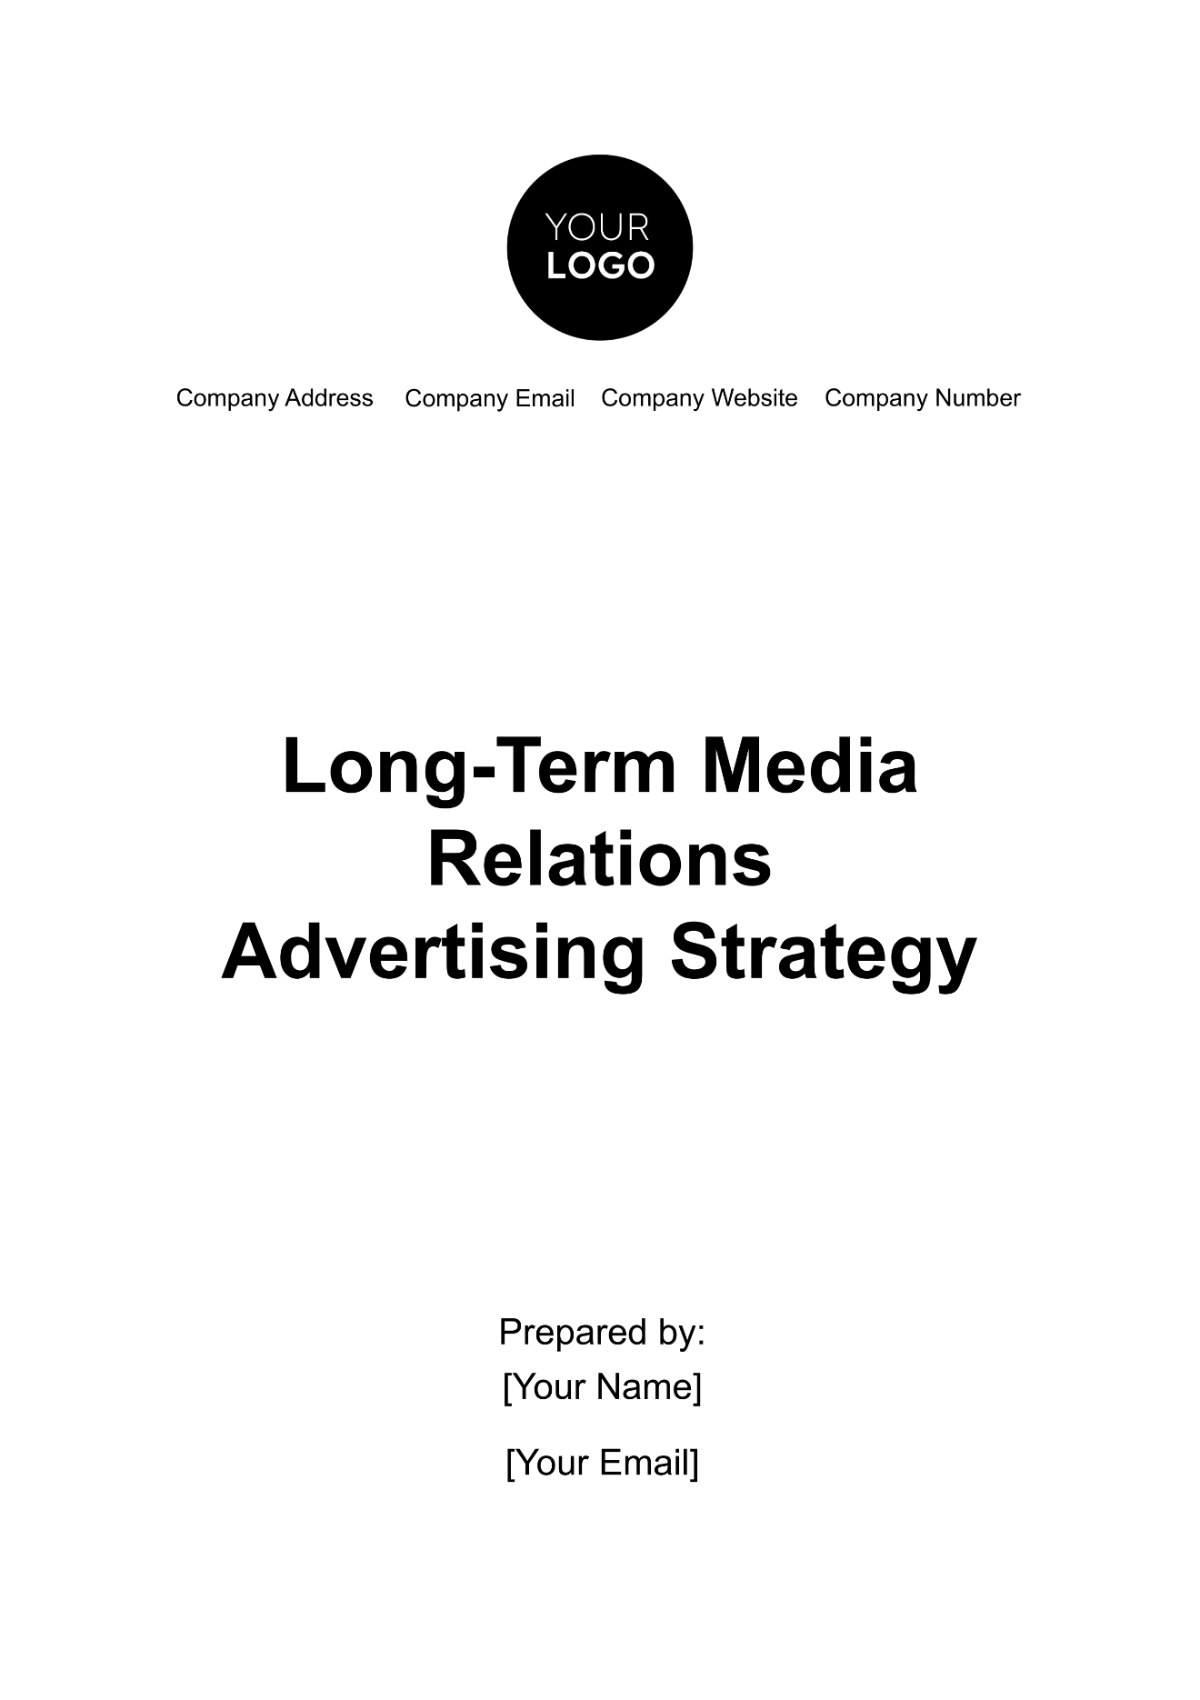 Long-Term Media Relations Advertising Strategy Template